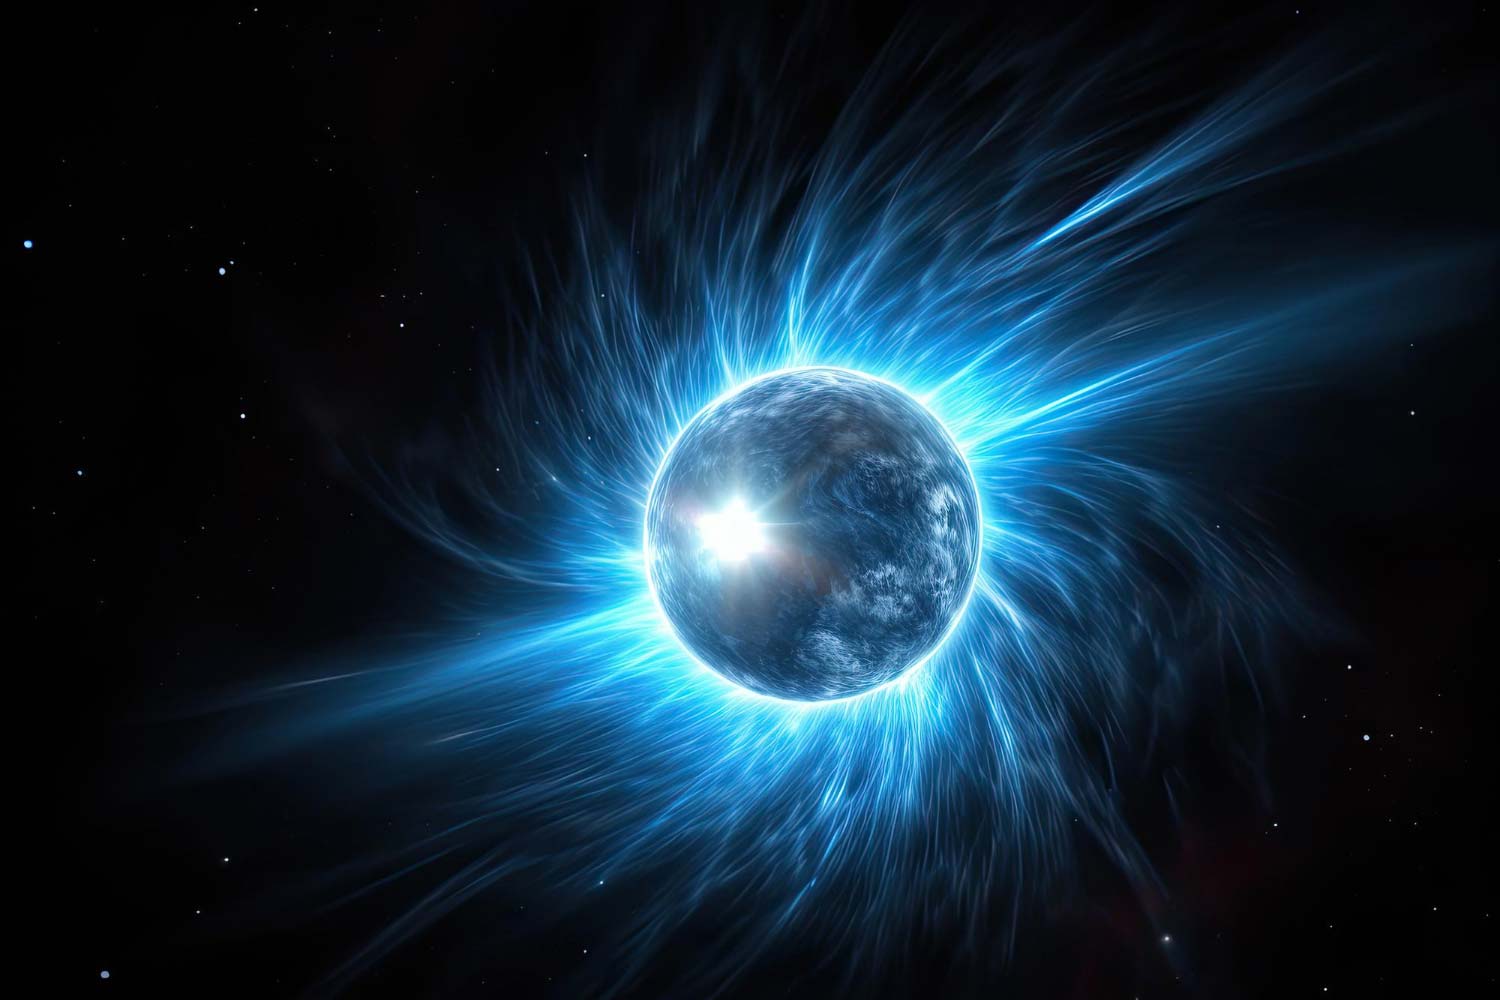 AstroSat detected milli-second burst in a new high magnetic field neutron star thumbnail